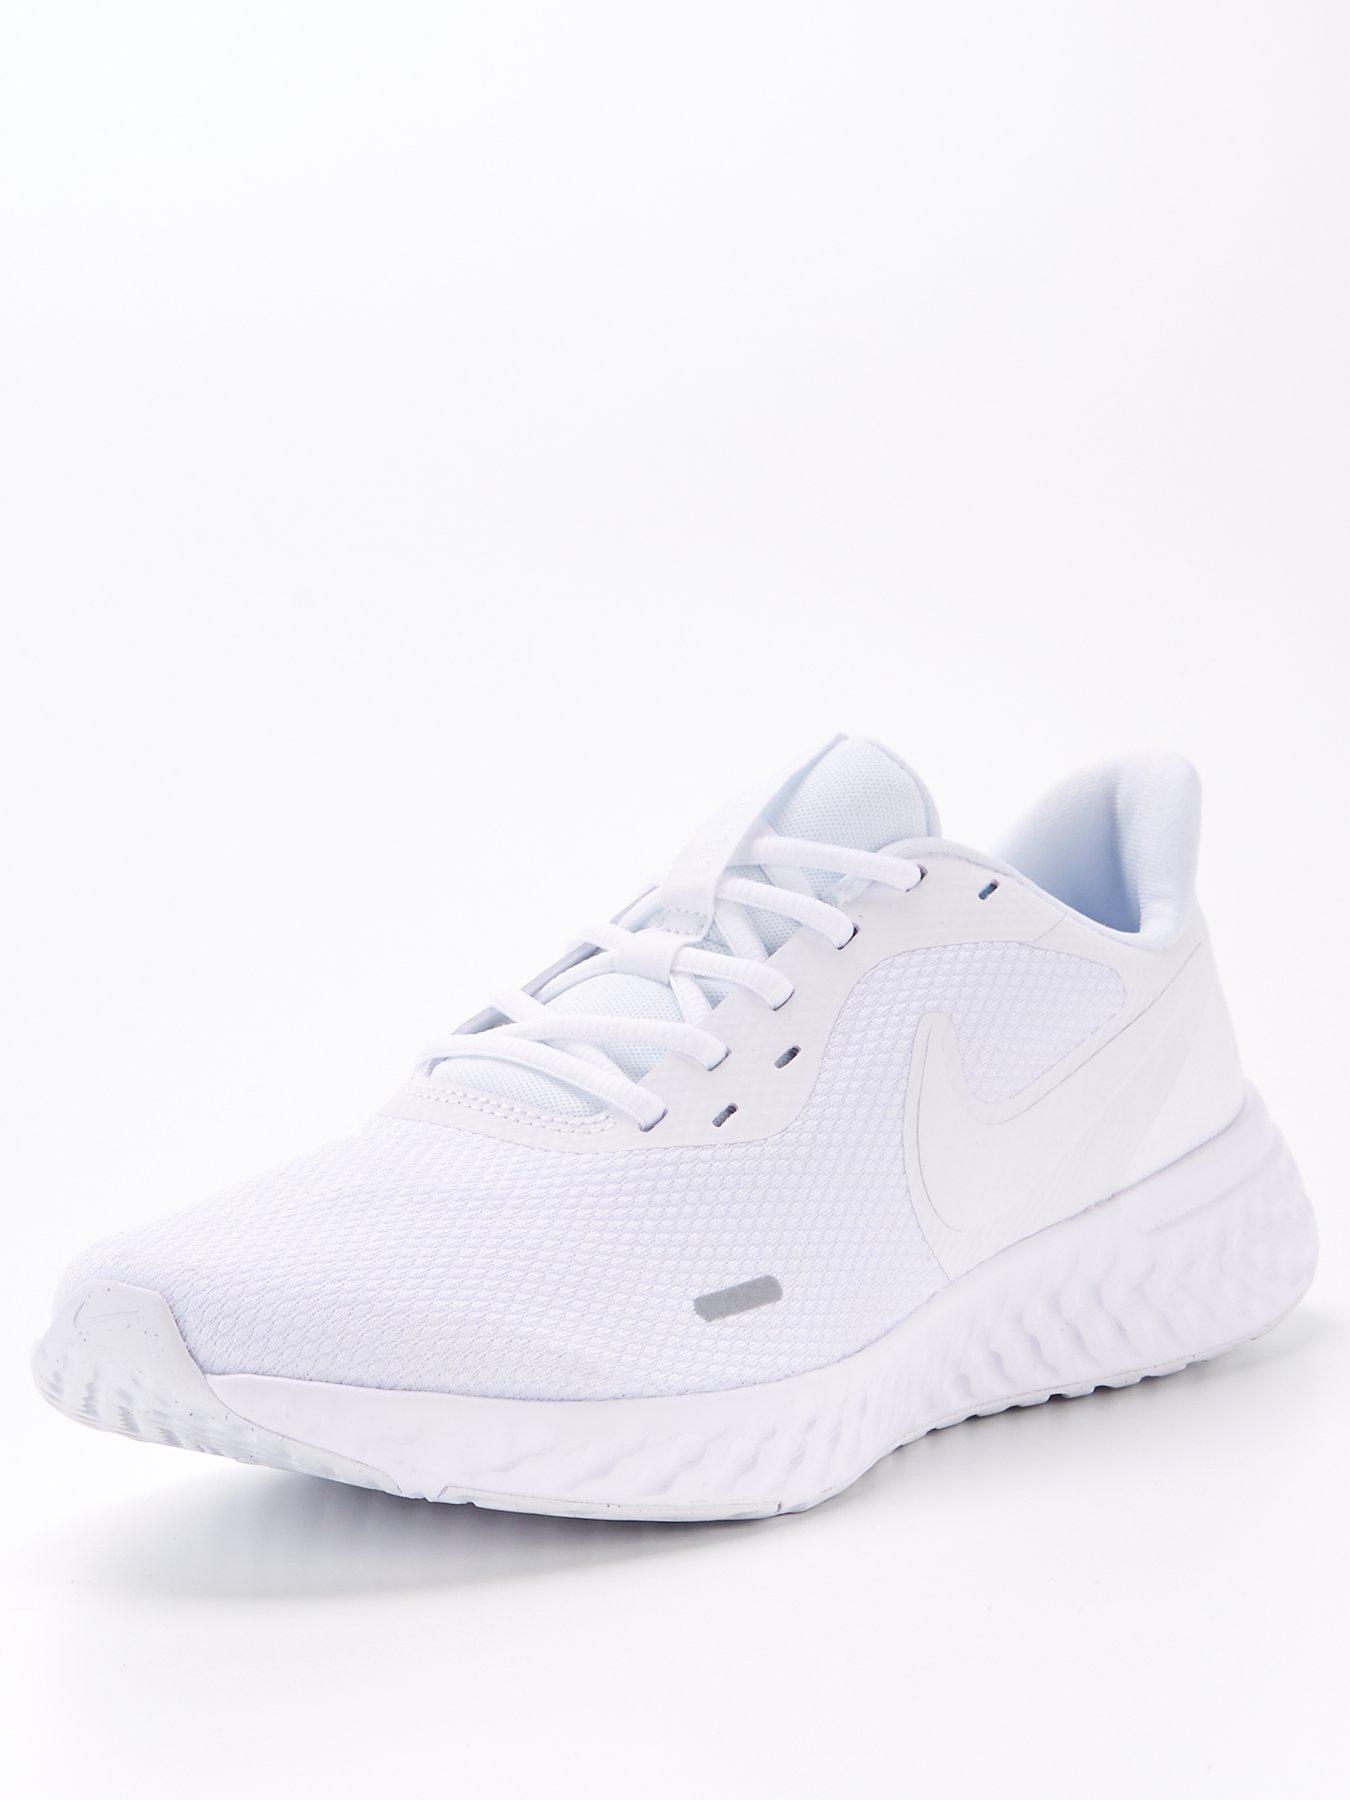 2 | 7 | Nike Revolution | Running | Mens trainers | Mens sports shoes ...